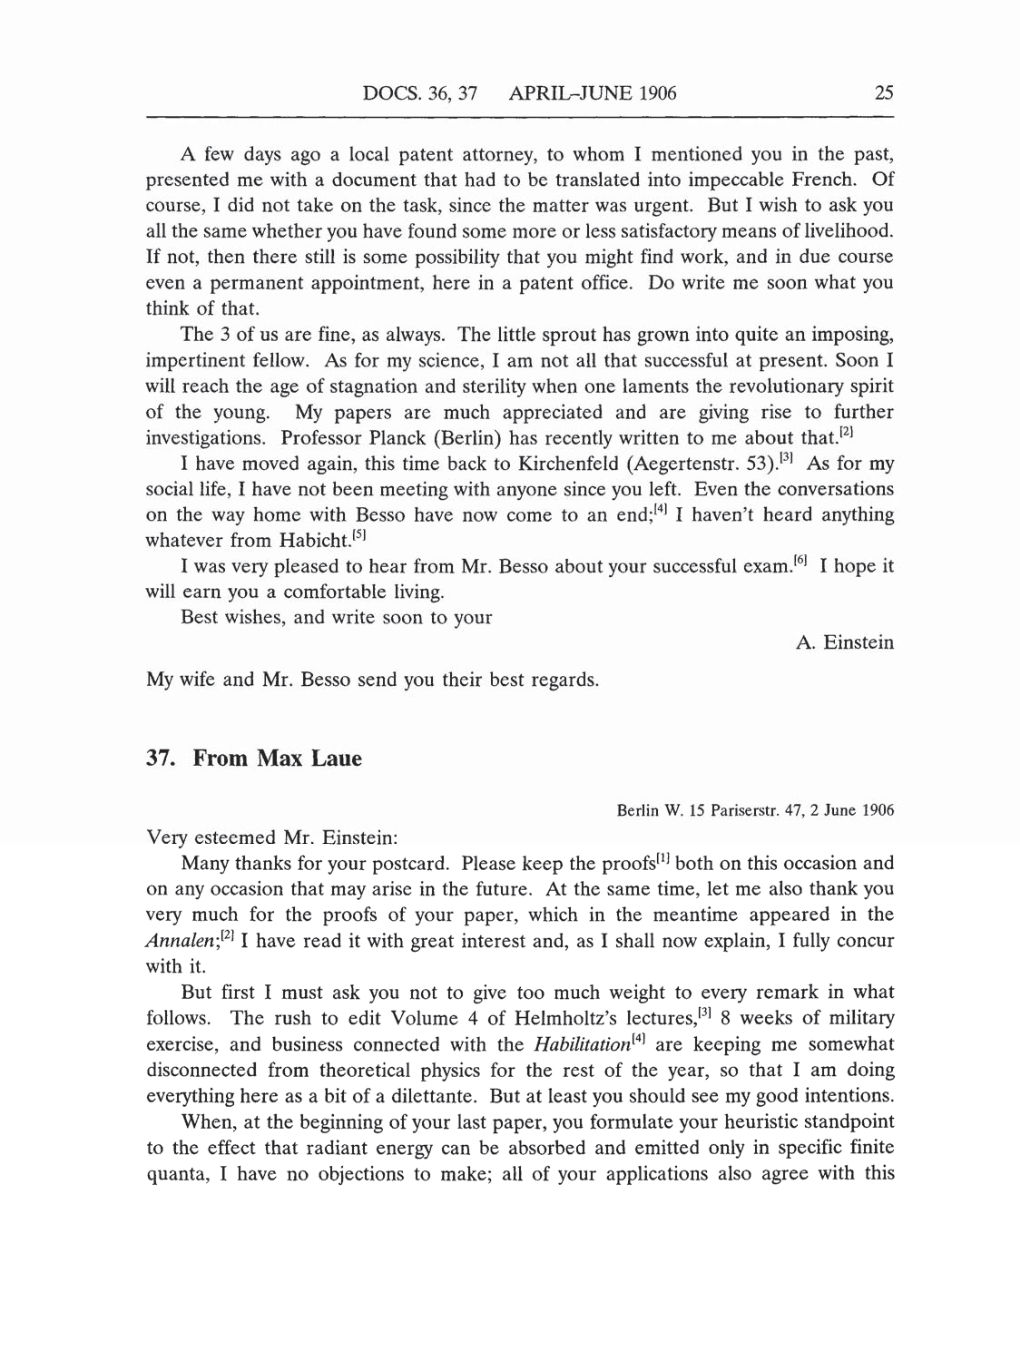 Volume 5: The Swiss Years: Correspondence, 1902-1914 (English translation supplement) page 25